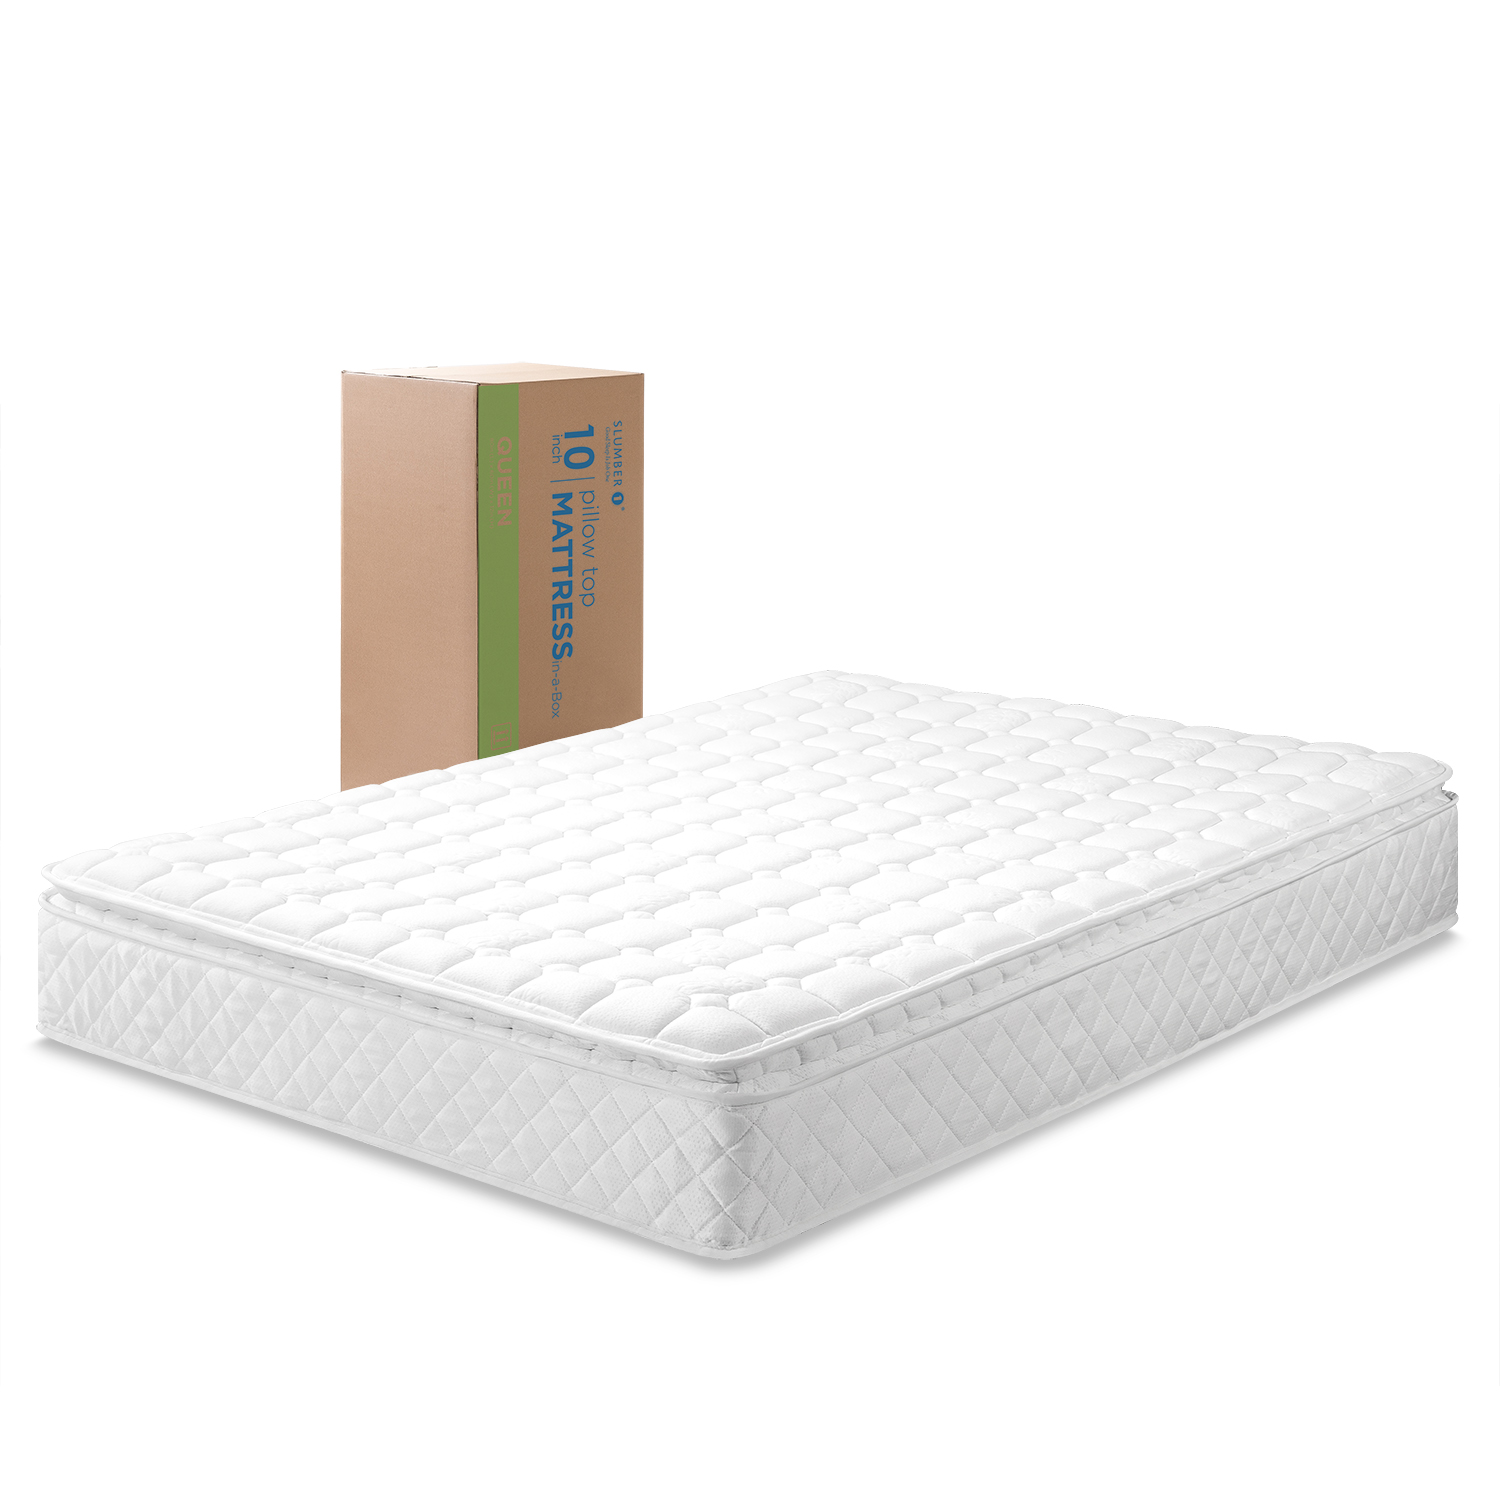 10" Hybrid of Comfort Foam and Pocket Spring Mattress, Twin - image 5 of 5